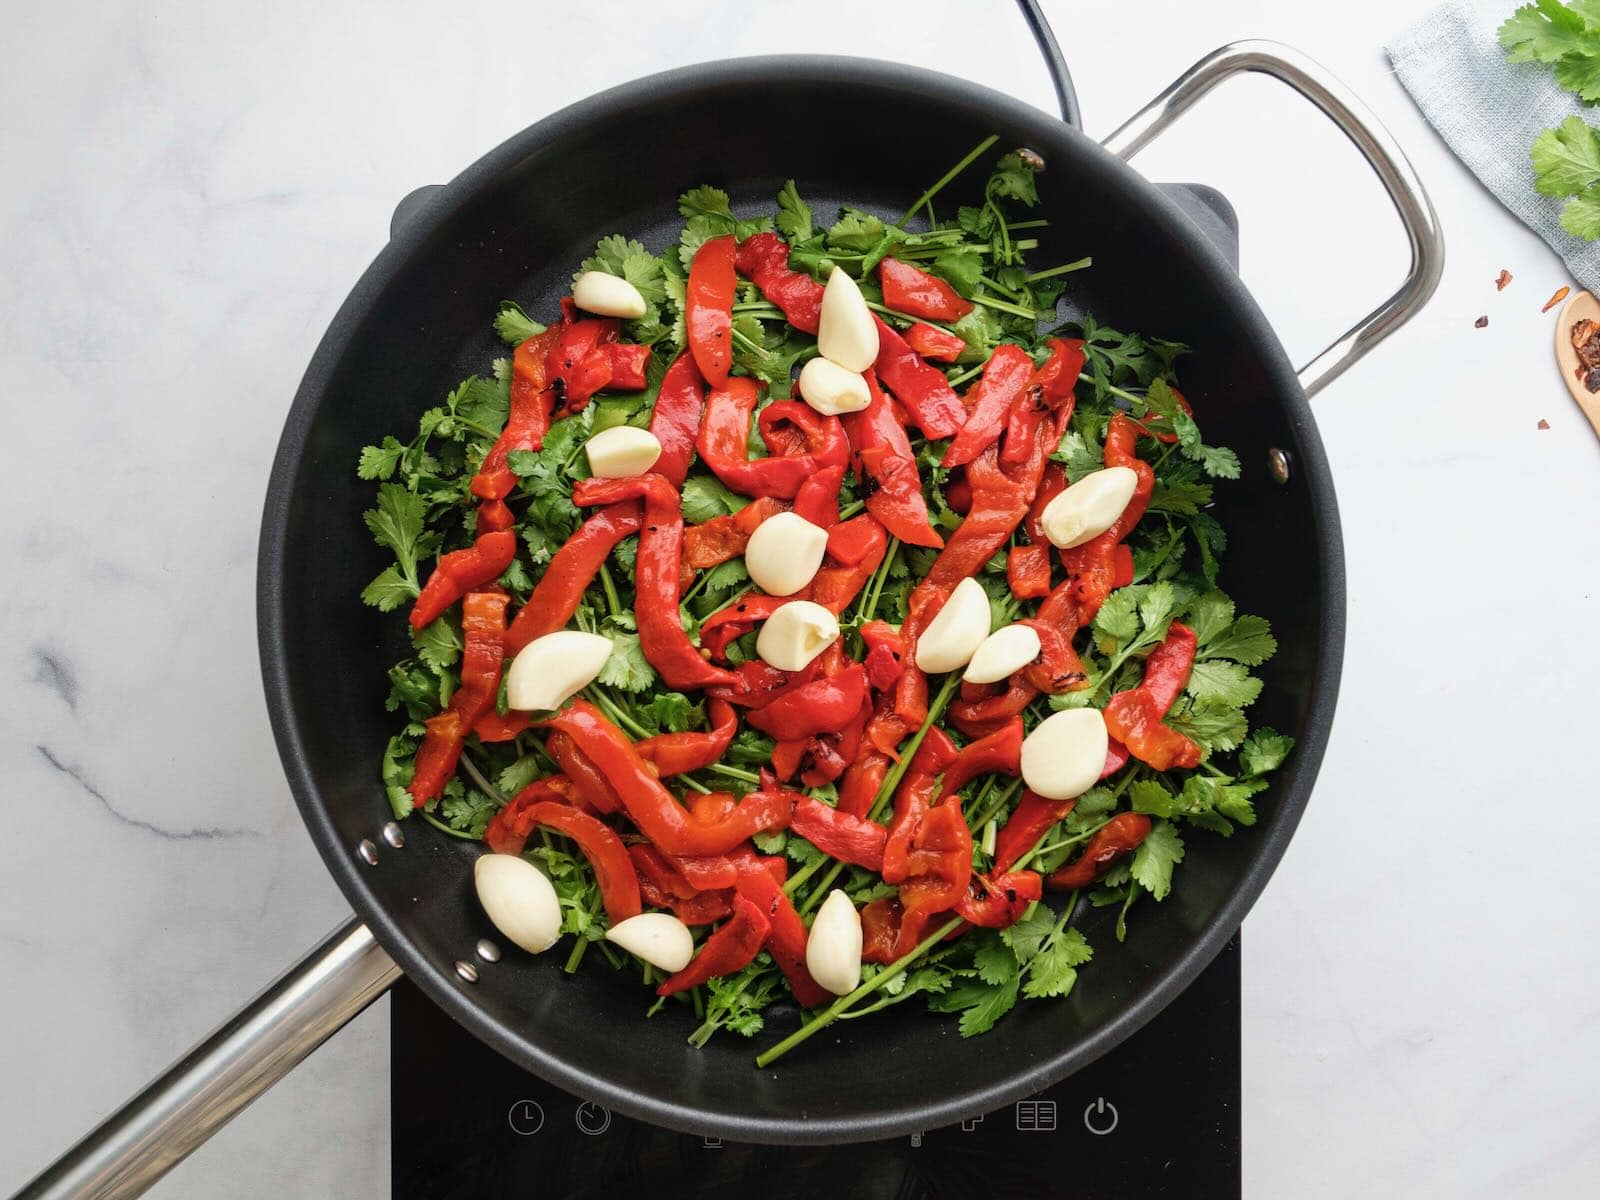 Horizontal overhead shot of a sautee pan filled with greens, red peppers, and garlic cloves.